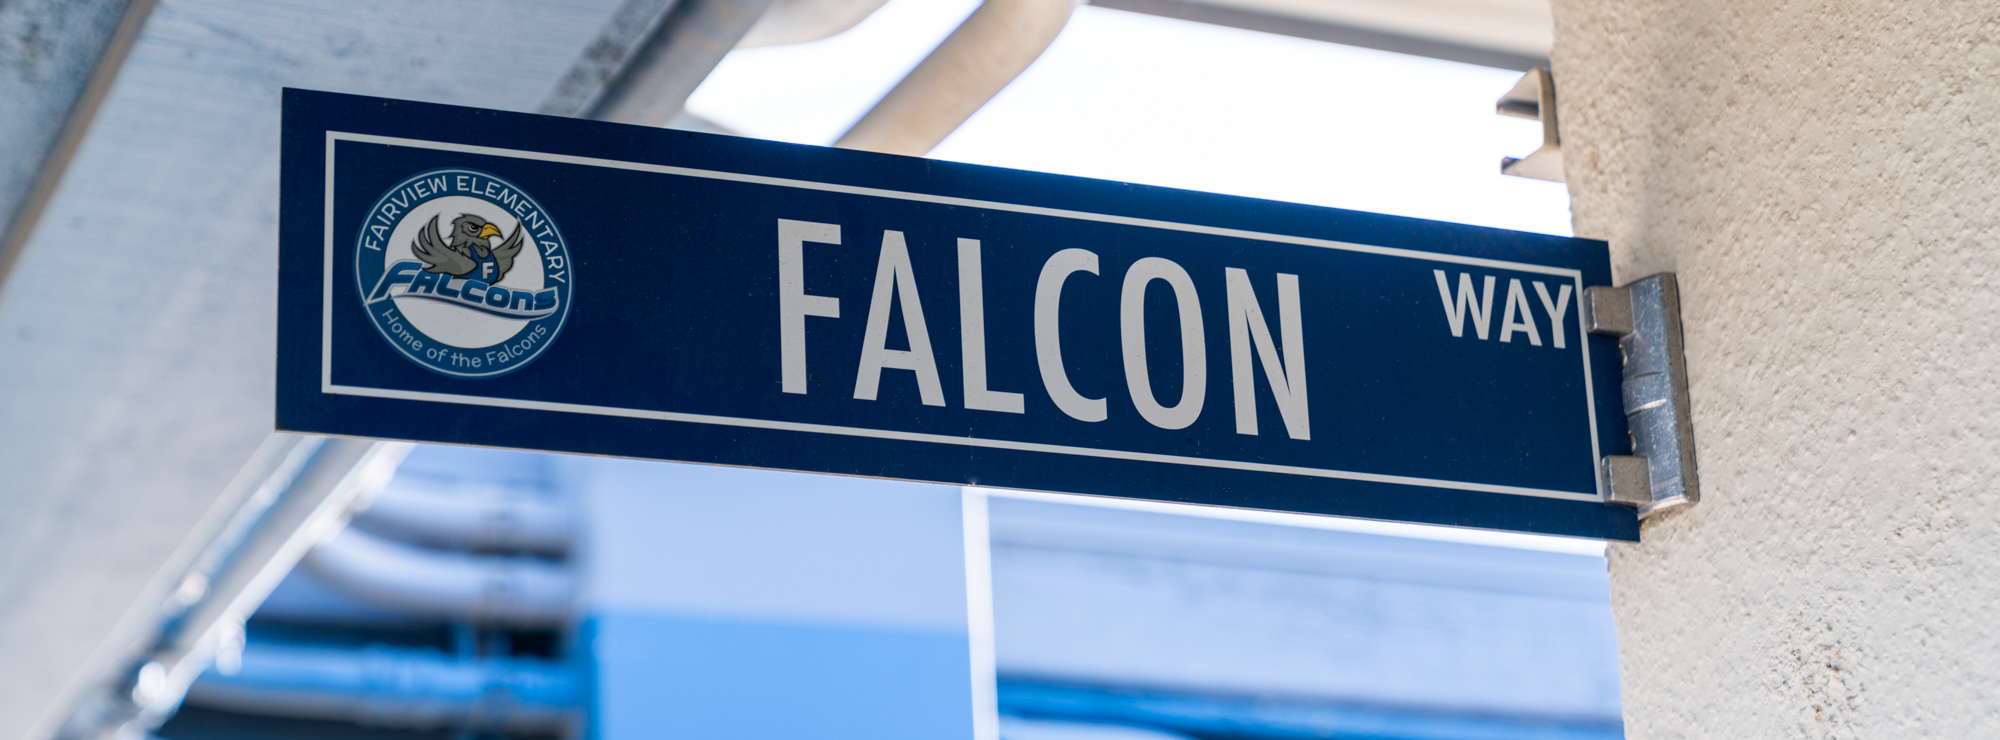 Fairview Falcon Way Street Sign on School Campus